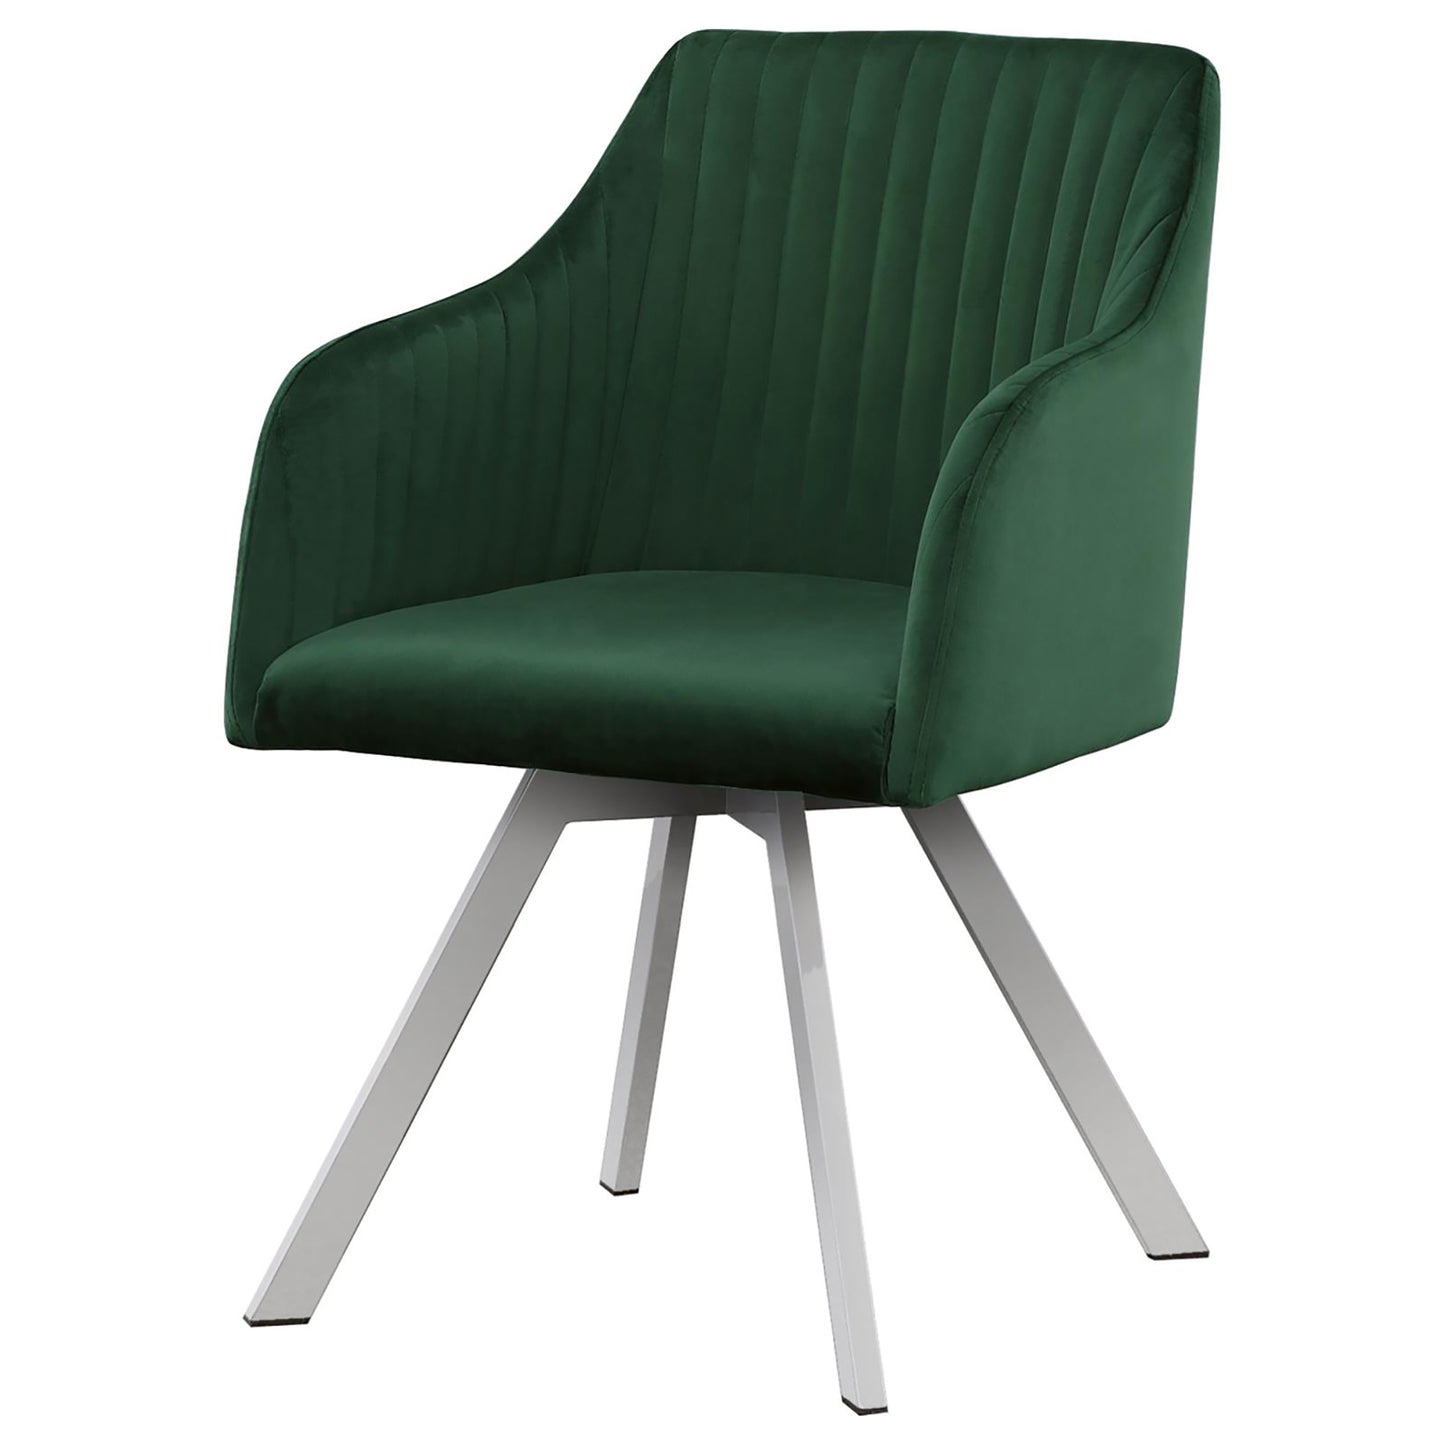 Green Channeled Sloped Arm Swivel Chair